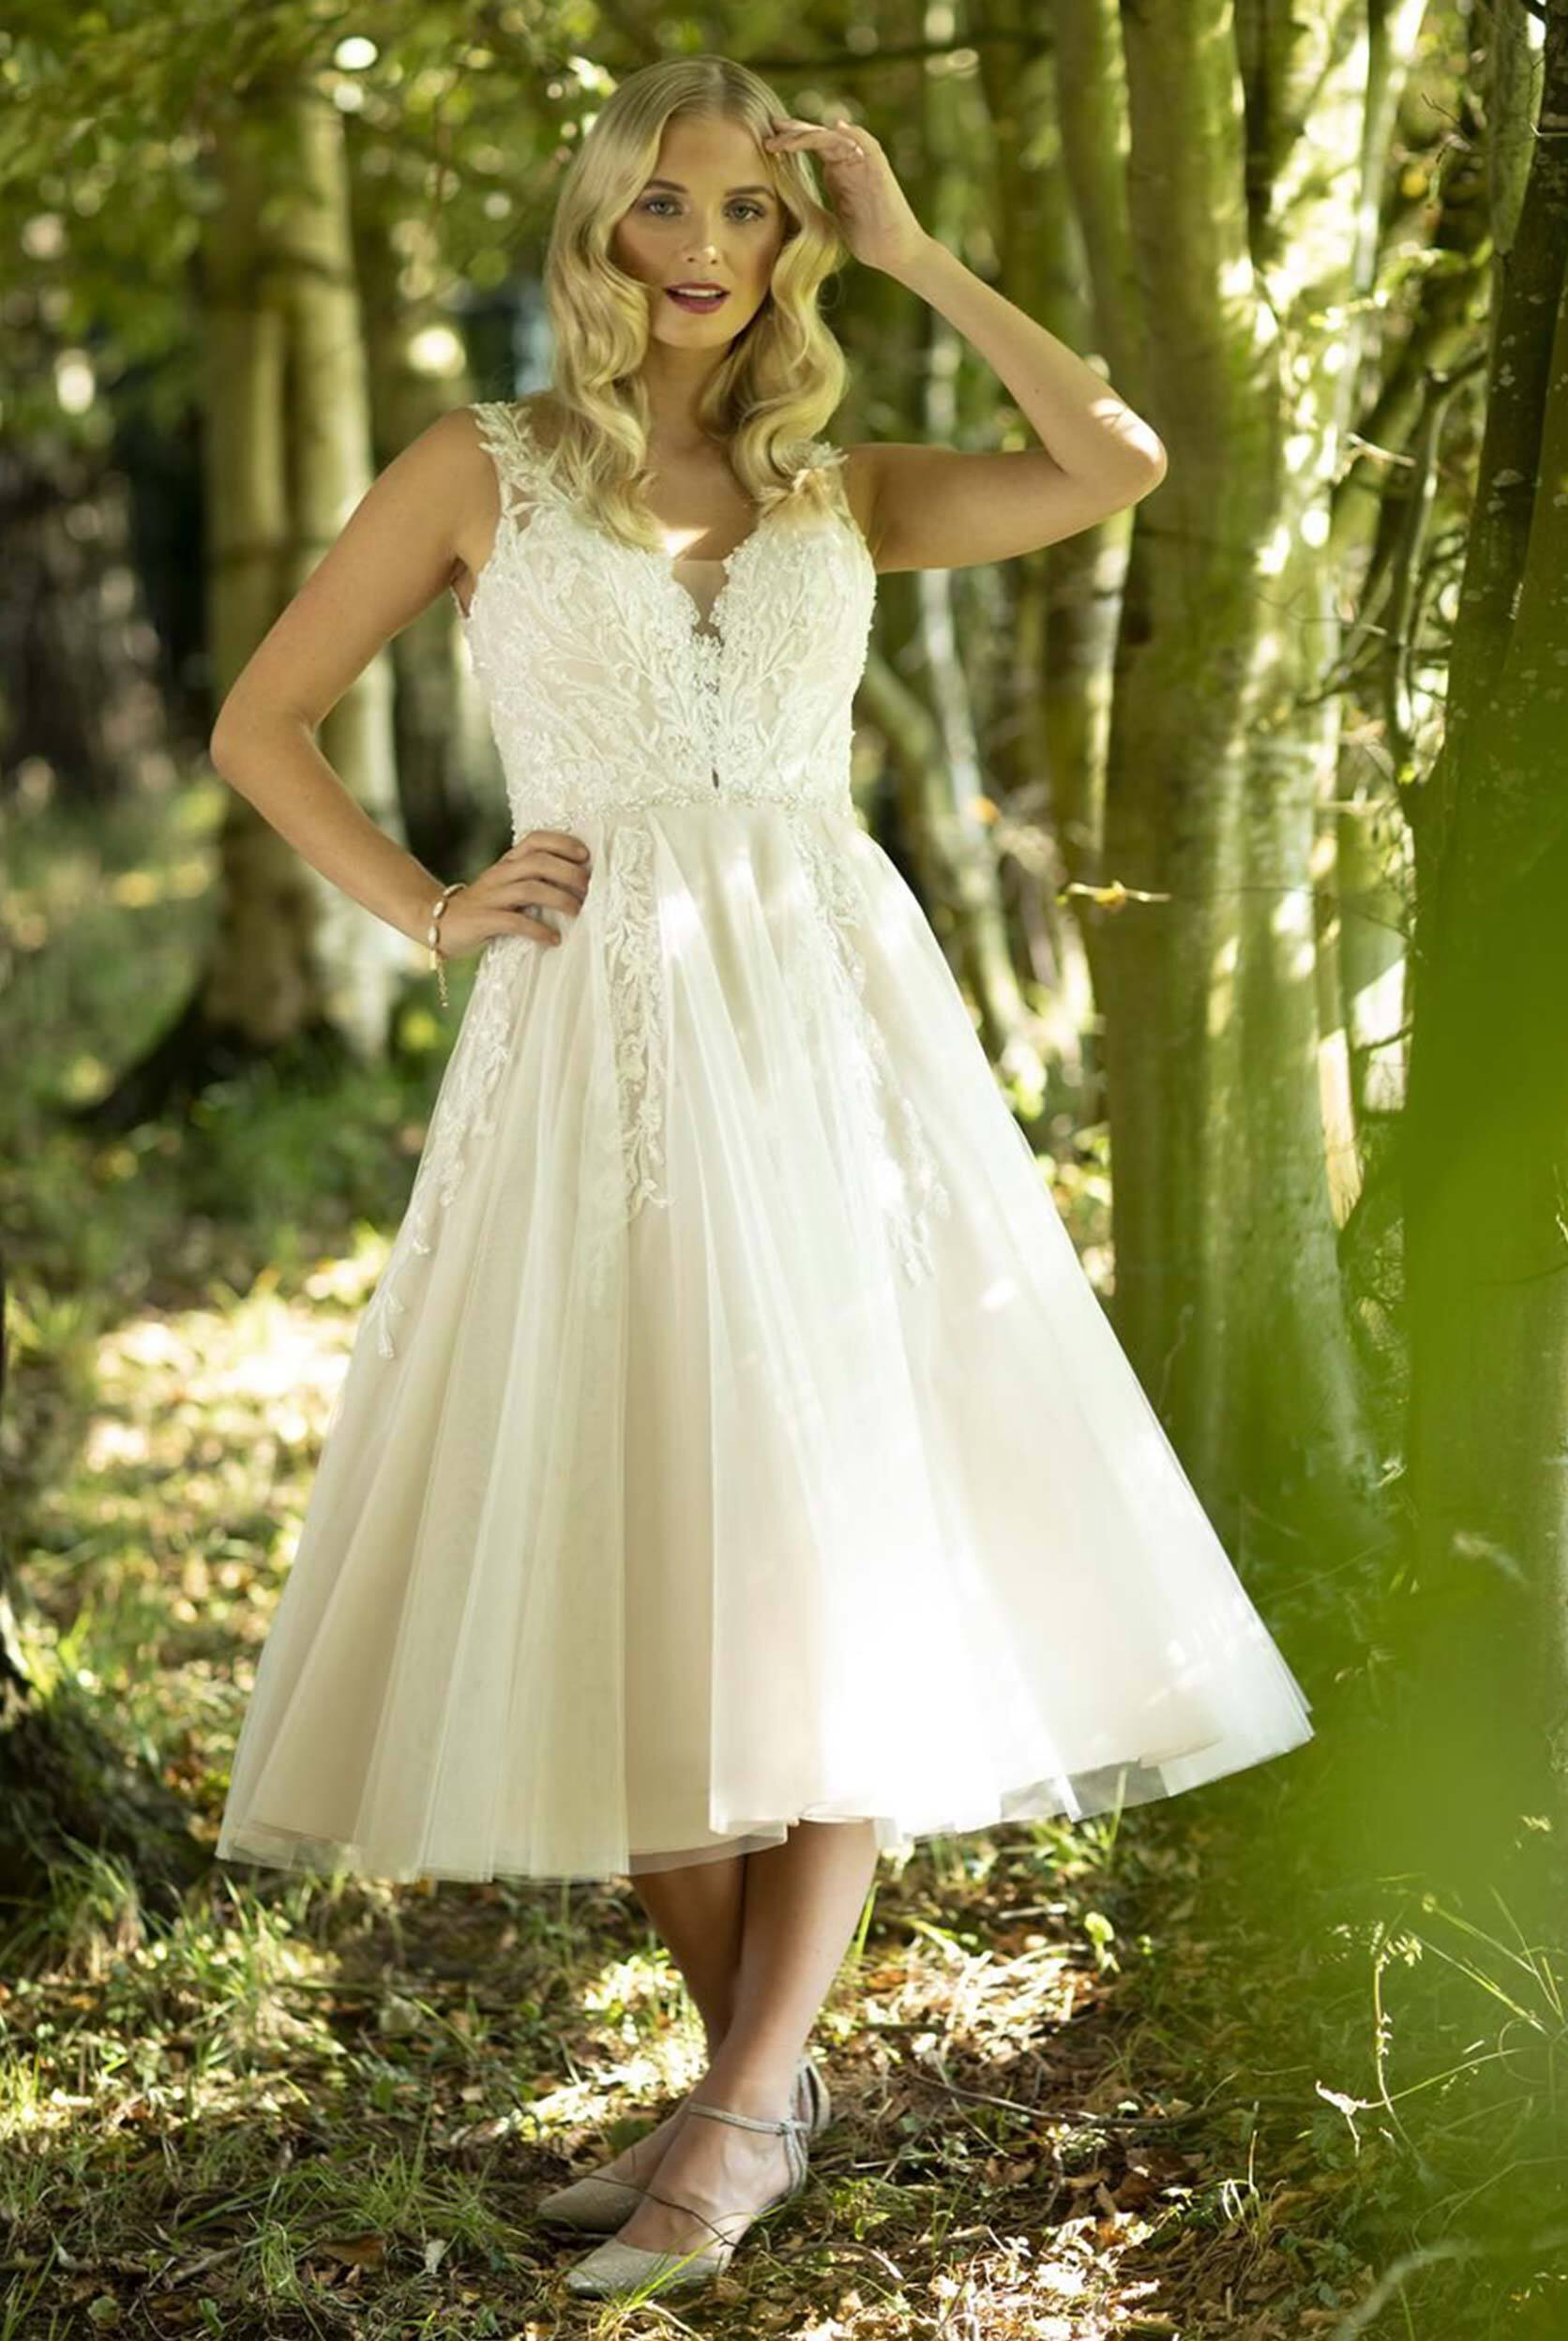 Model wearing a white Tea Lenght Style Dress